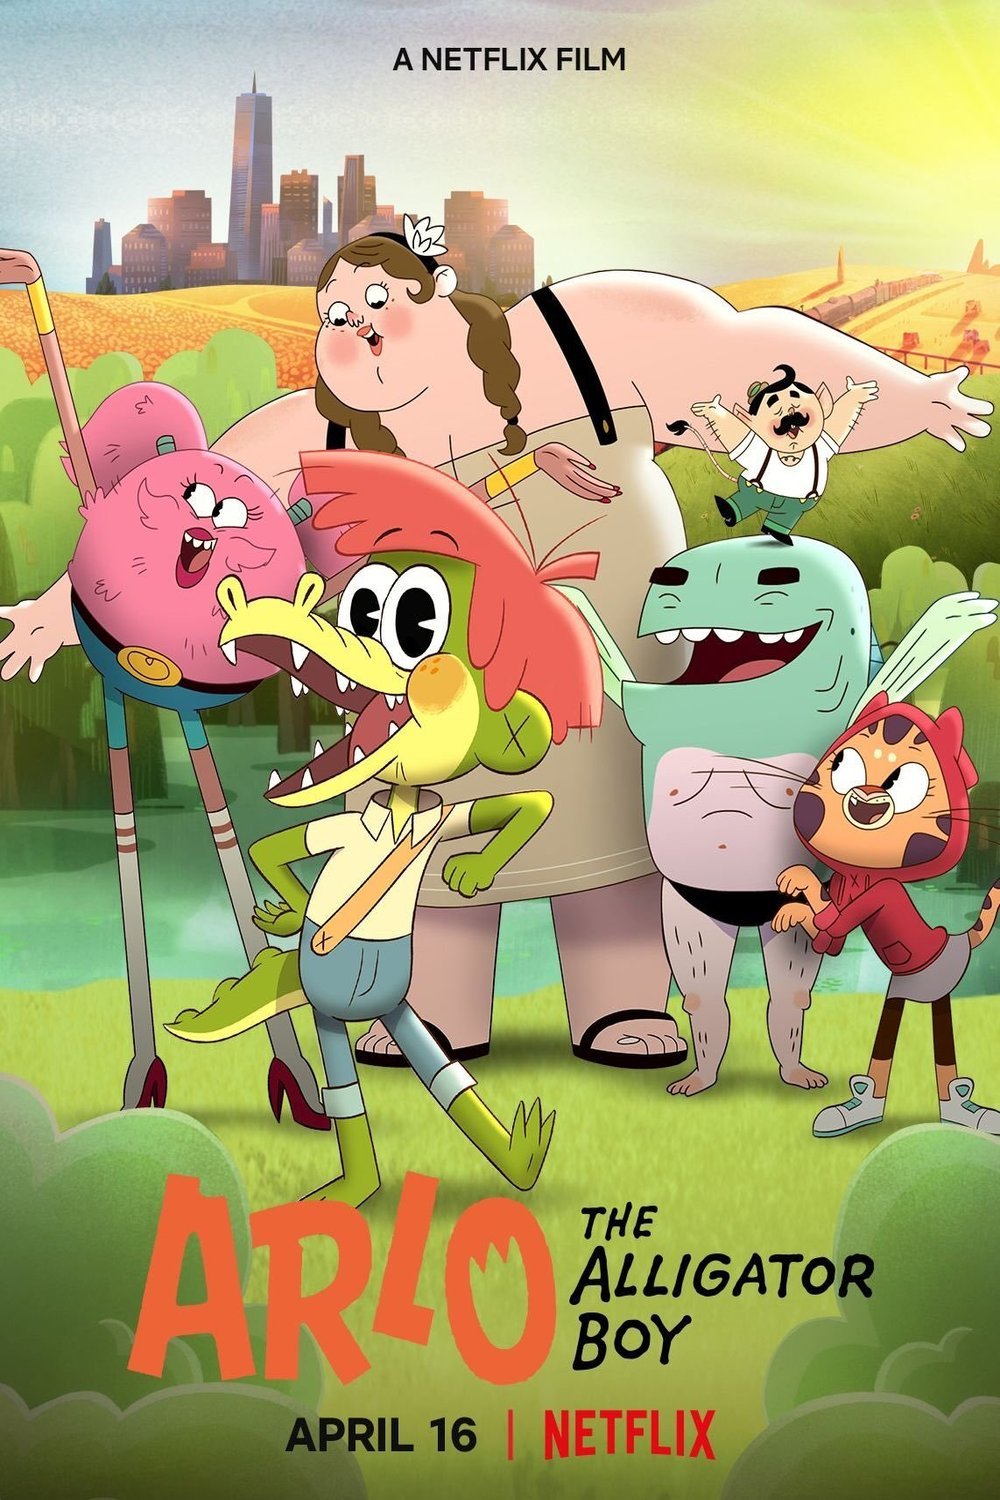 Poster of the movie Arlo the Alligator Boy